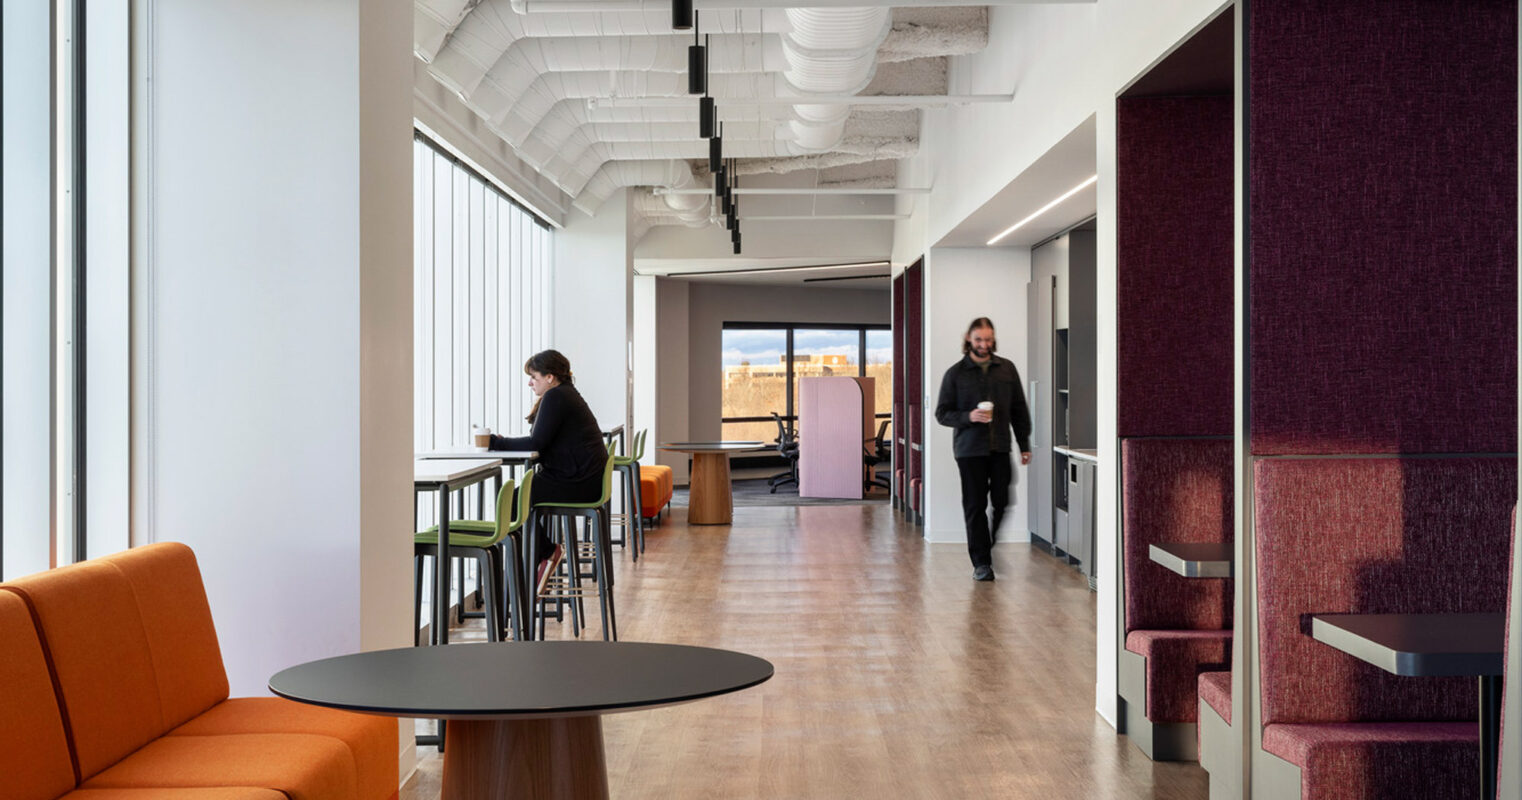 Modern office space with exposed white beams and ductwork on the ceiling, contrasted by warm wooden flooring. An orange couch and round black tables add color pops while two individuals work in natural light by large windows. Private purple-accented cubicles demonstrate thoughtful spatial design.